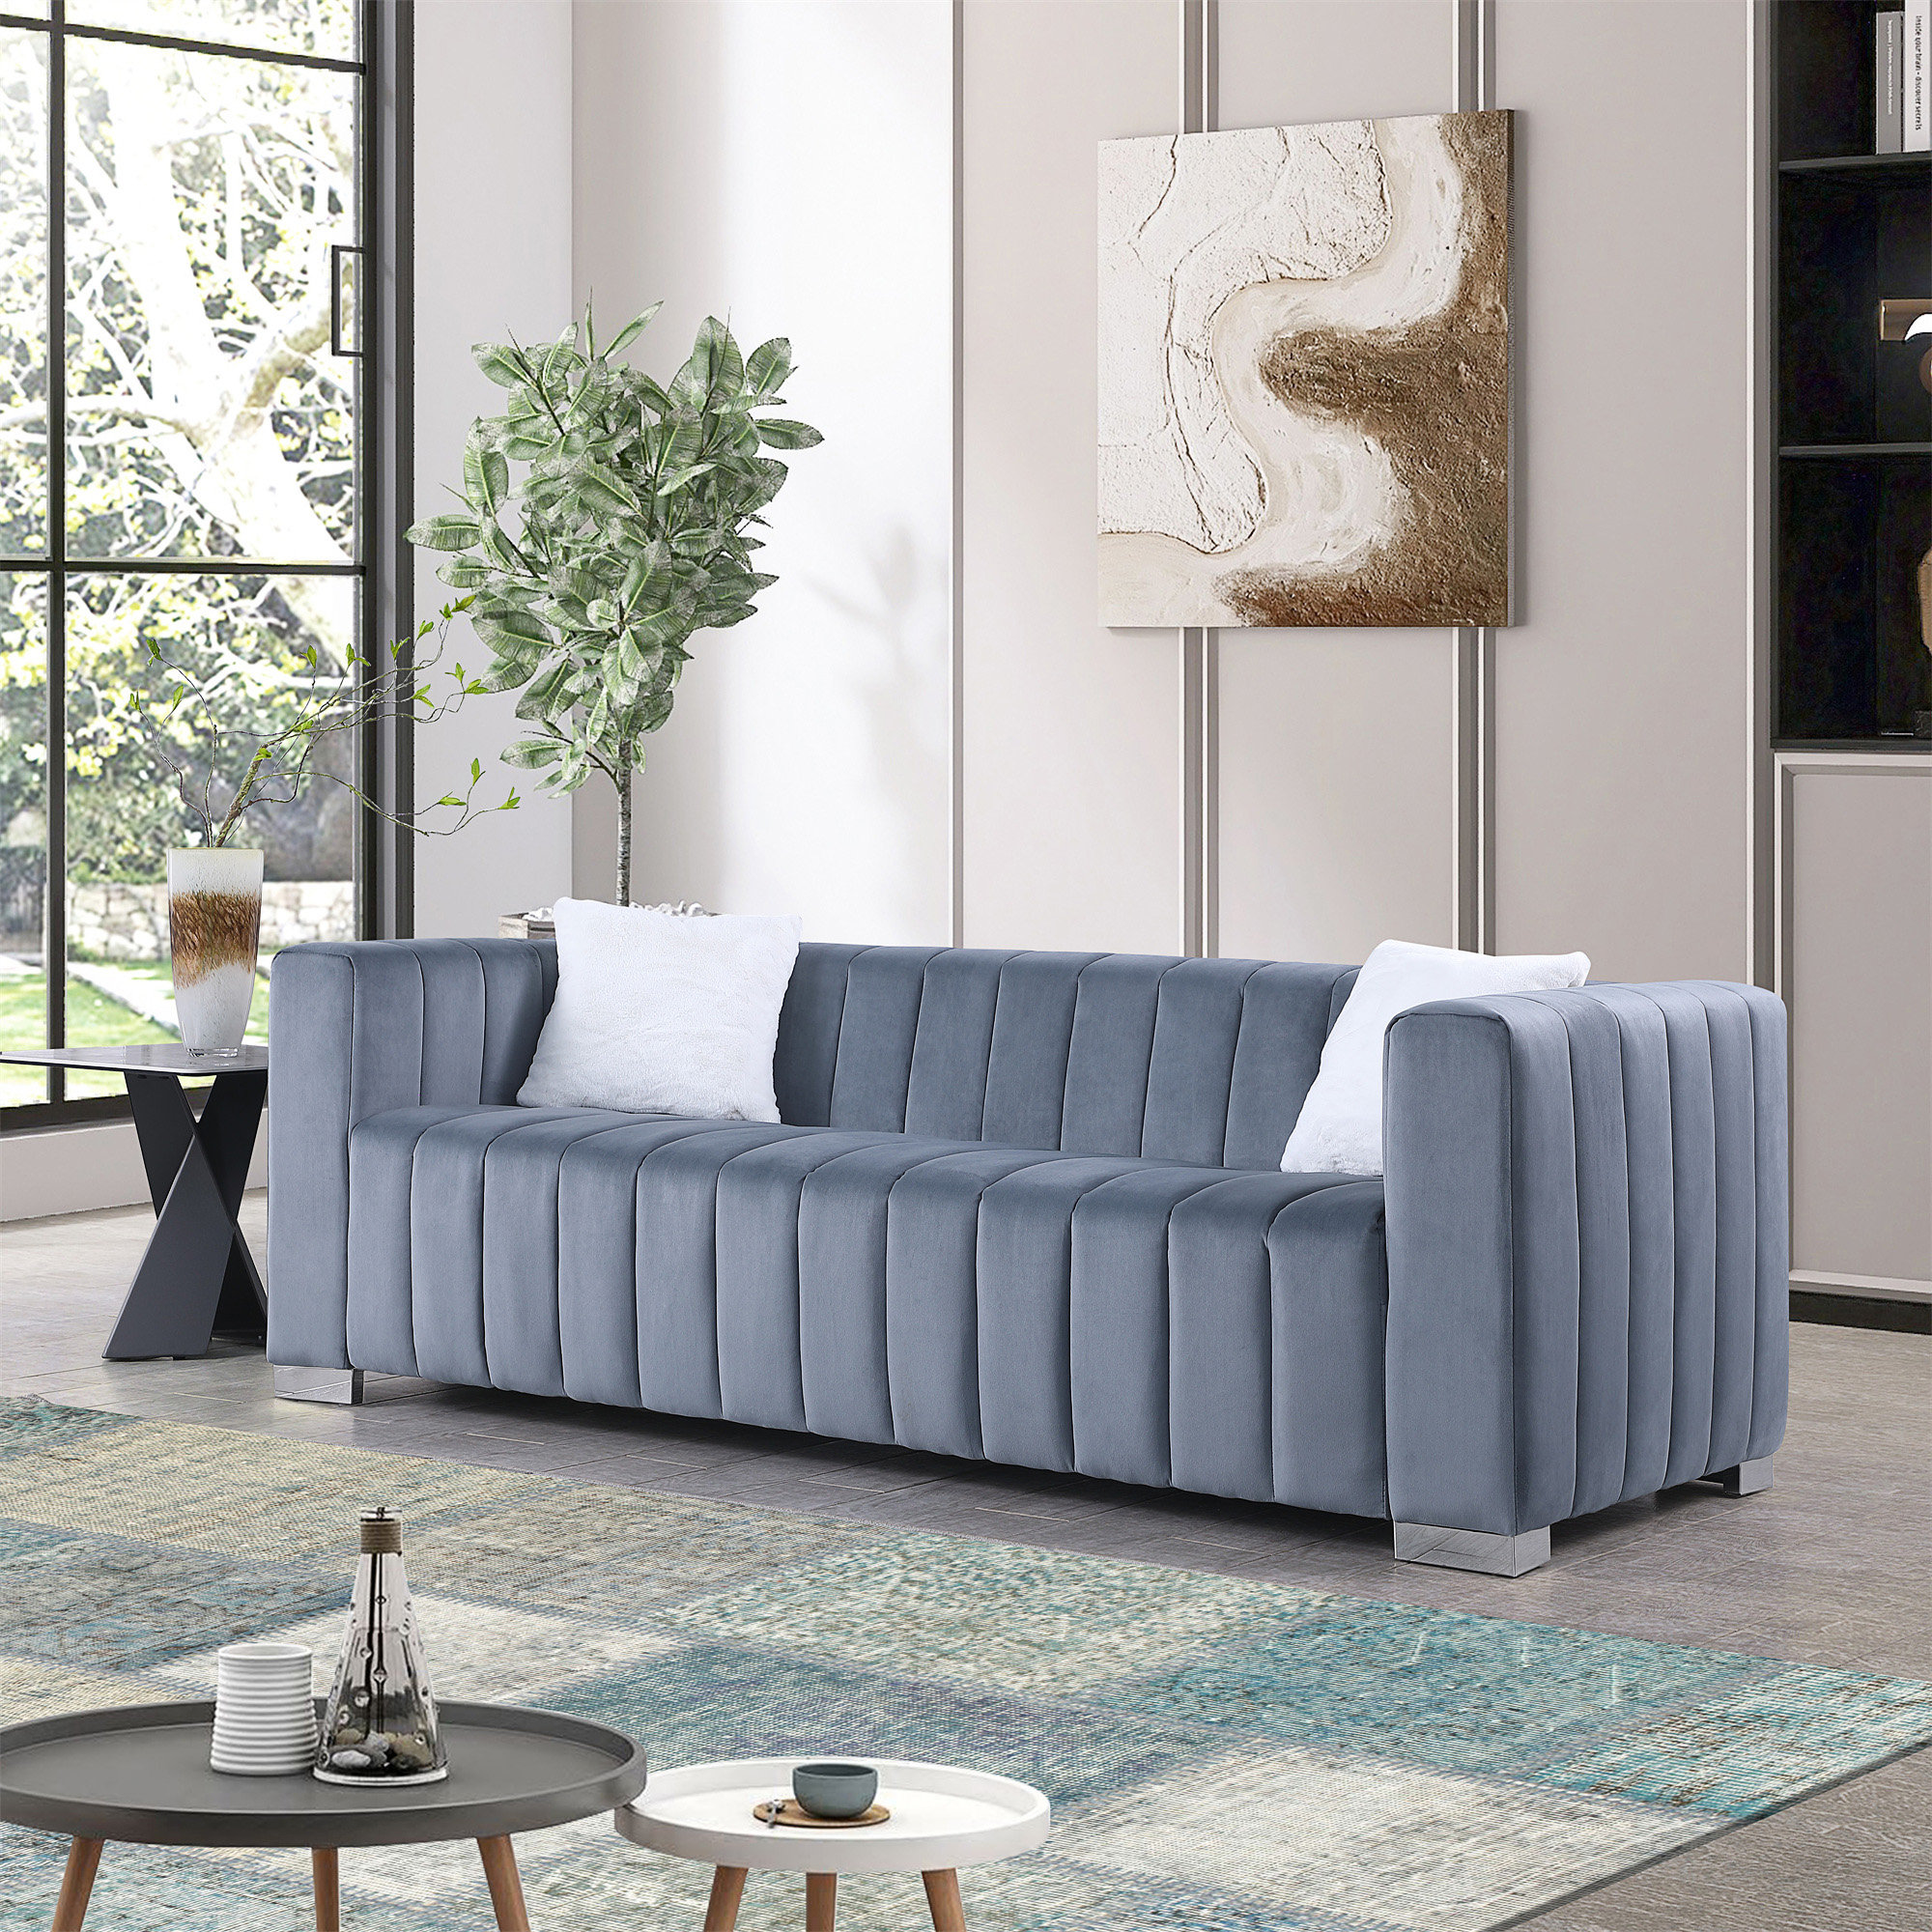 Upholstered Sofa,Loveseat,Couches,Sofas with Metal Legs